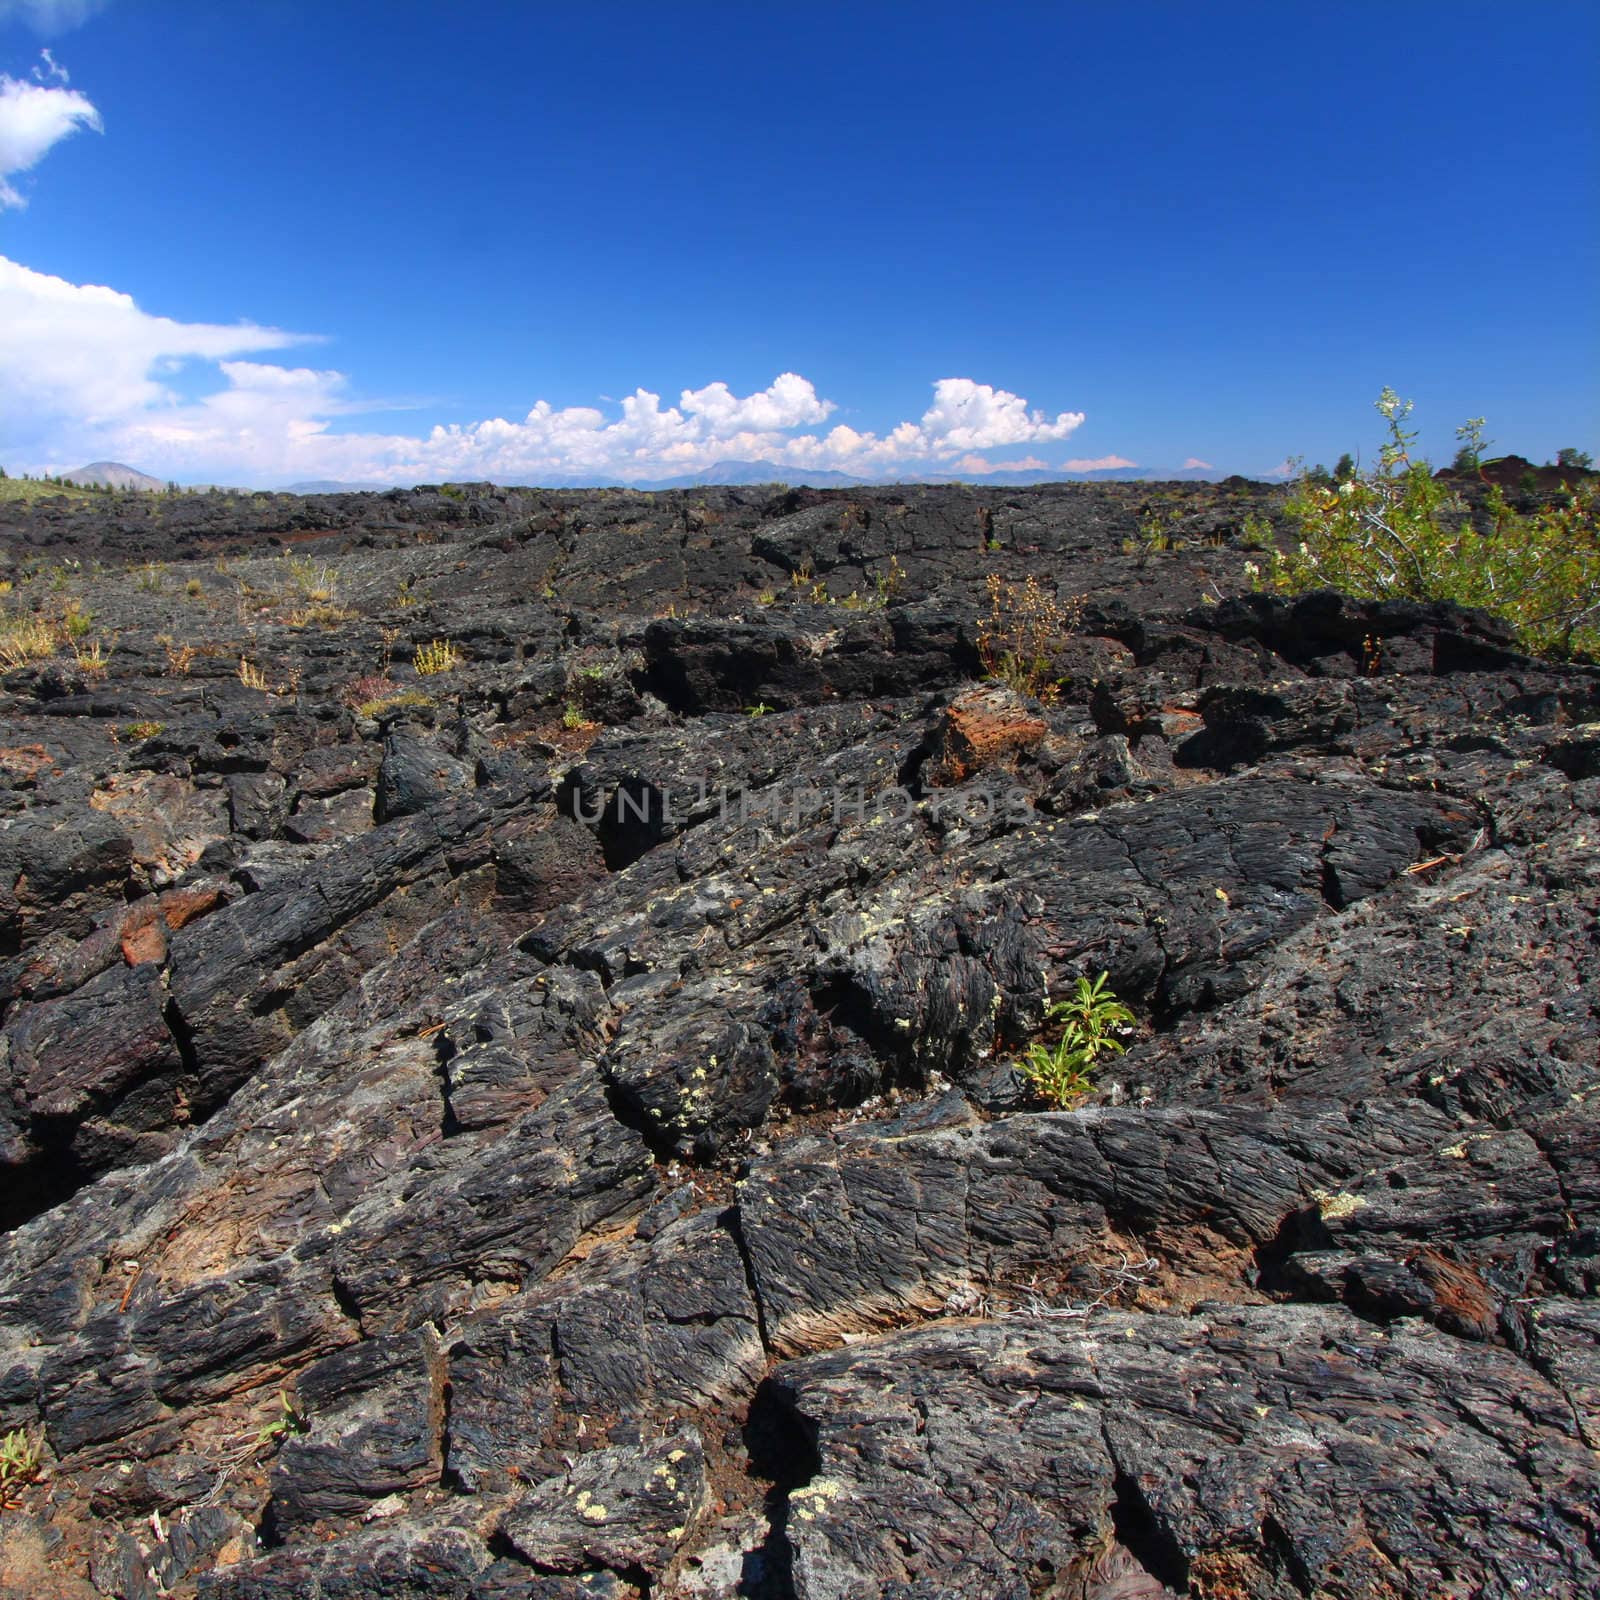 Volcanic rock covers the landscape at Craters of the Moon National Monument of Idaho.